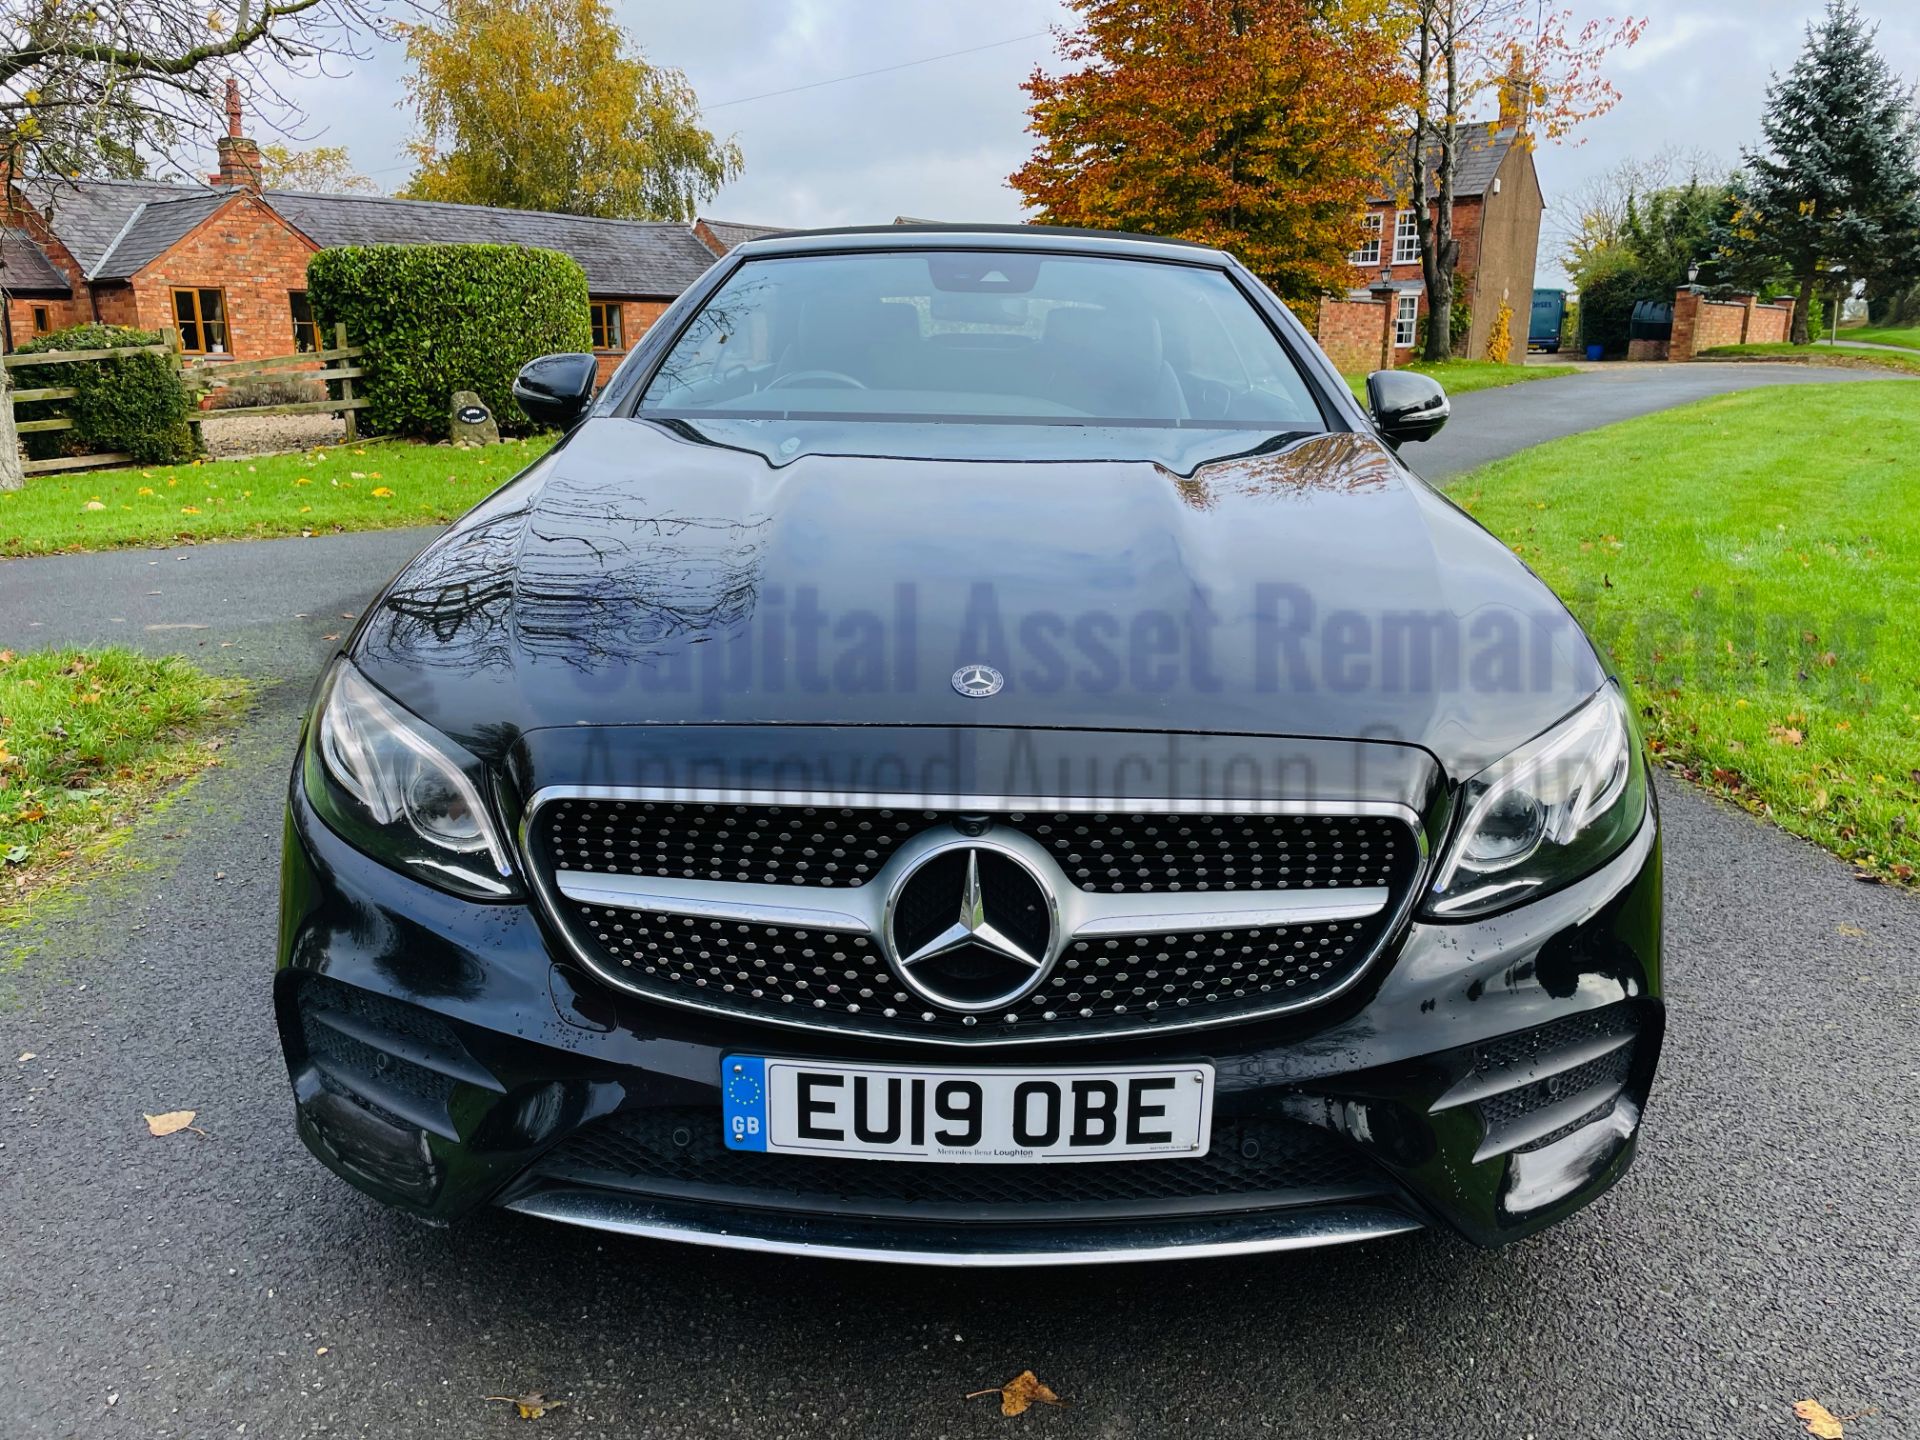 MERCEDES-BENZ E220d *AMG LINE - CABRIOLET* (2019 - EURO 6) '9G TRONIC AUTO - SAT NAV' *FULLY LOADED* - Image 8 of 66